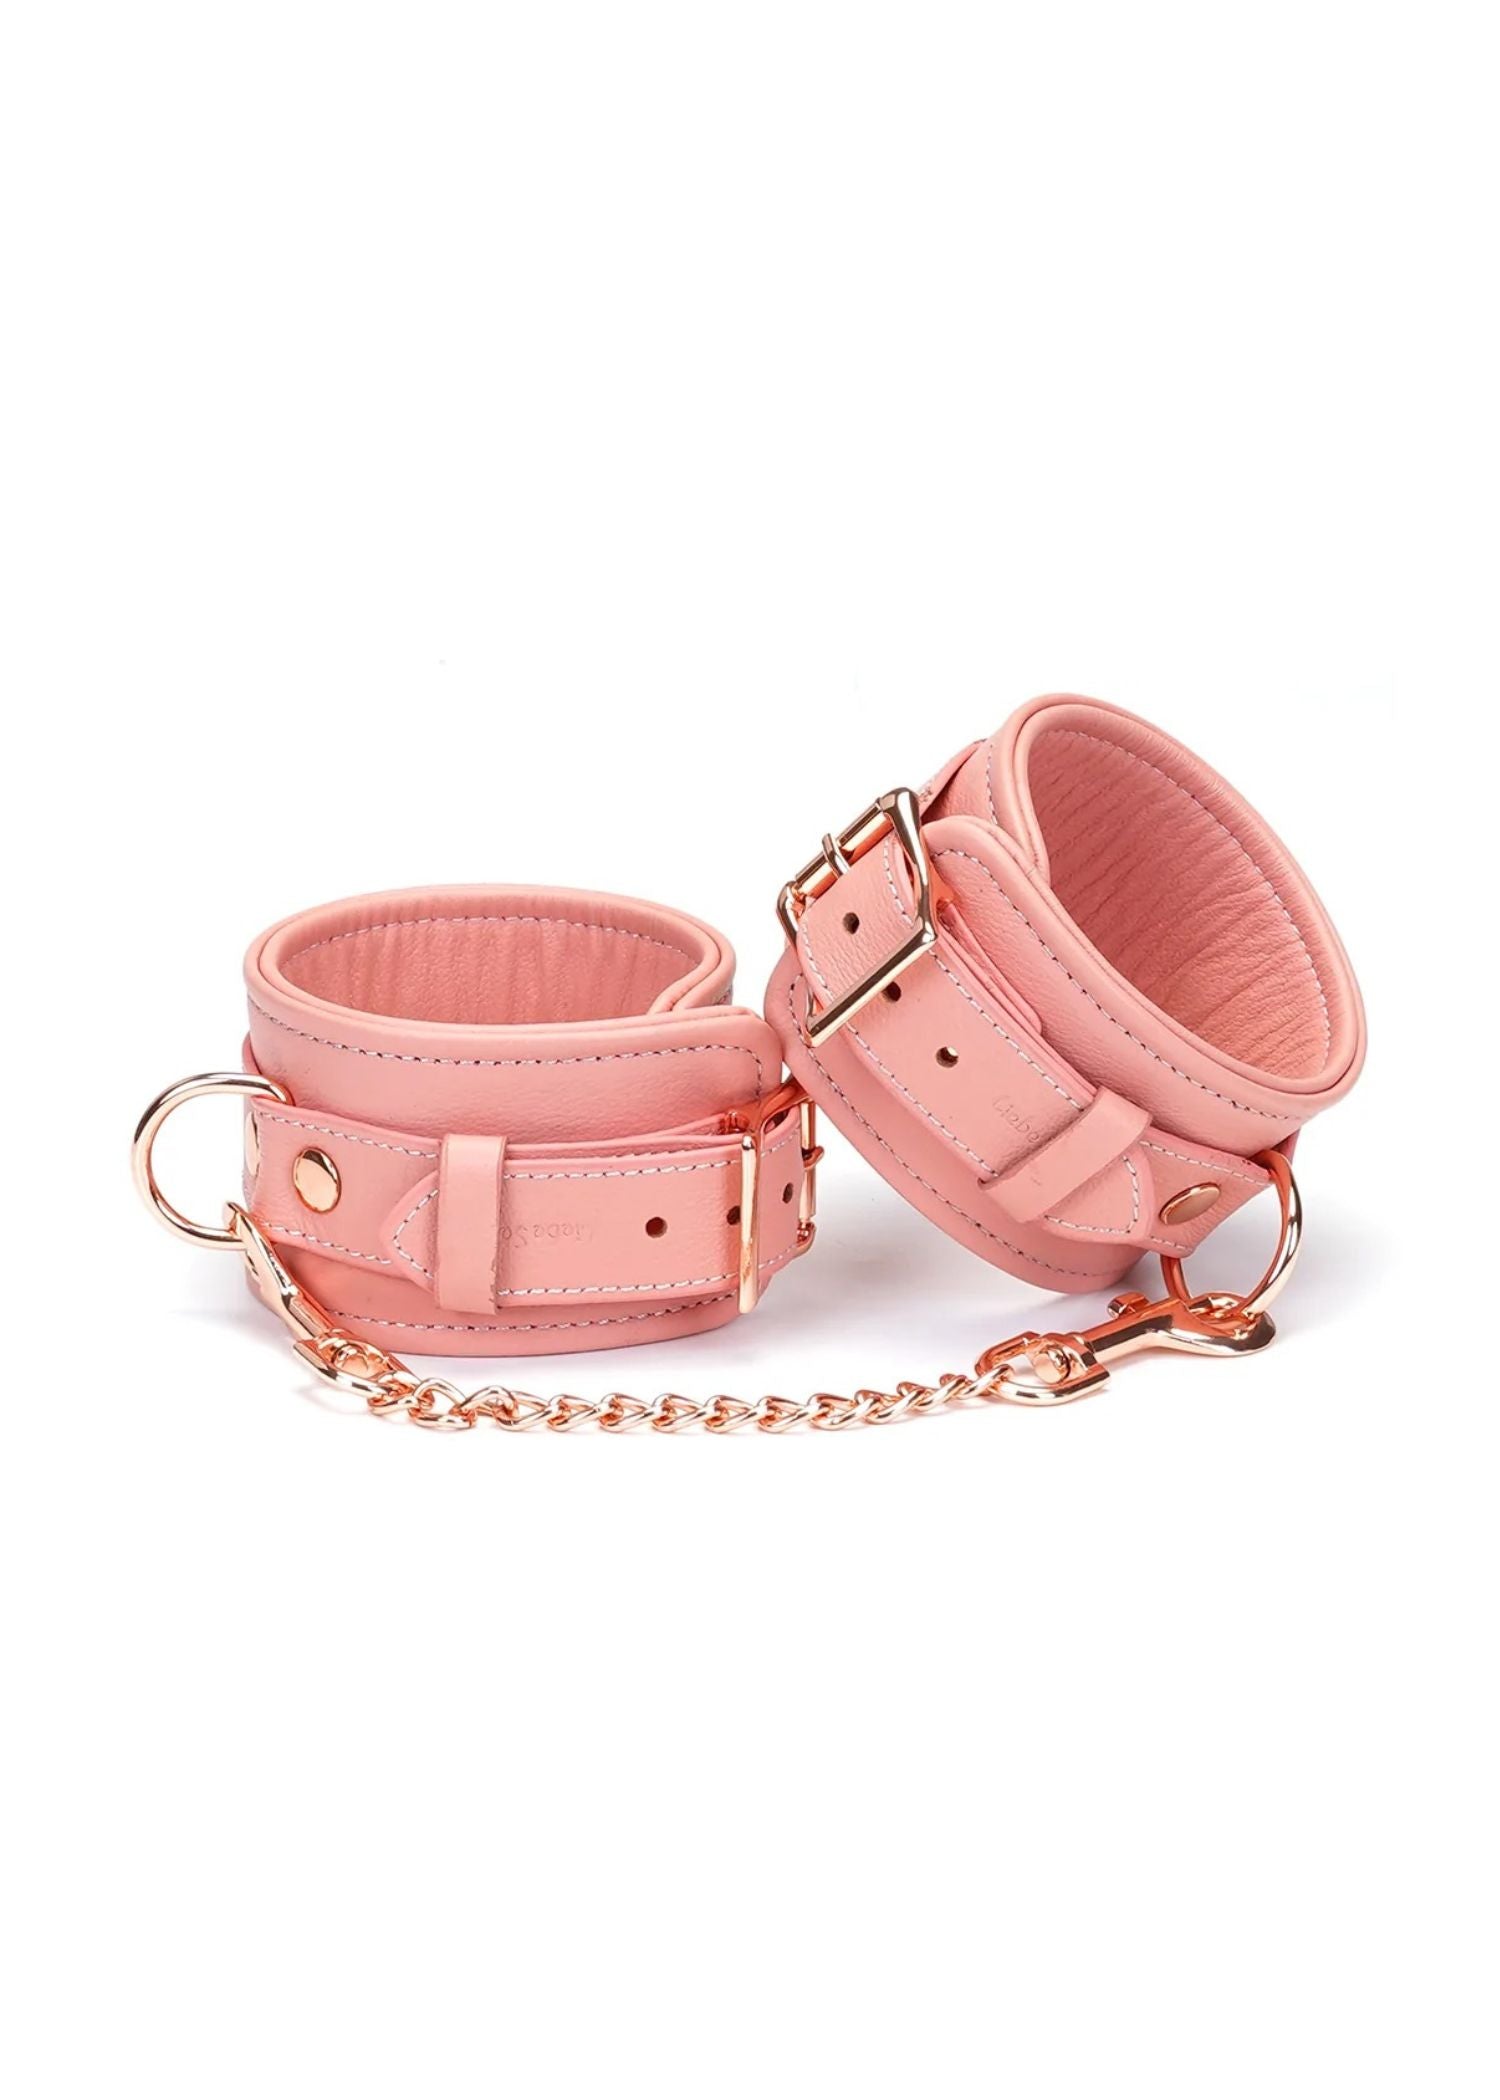 Liebe Seele Pink Dream Leather Cuffs | Avec Amour Lingerie